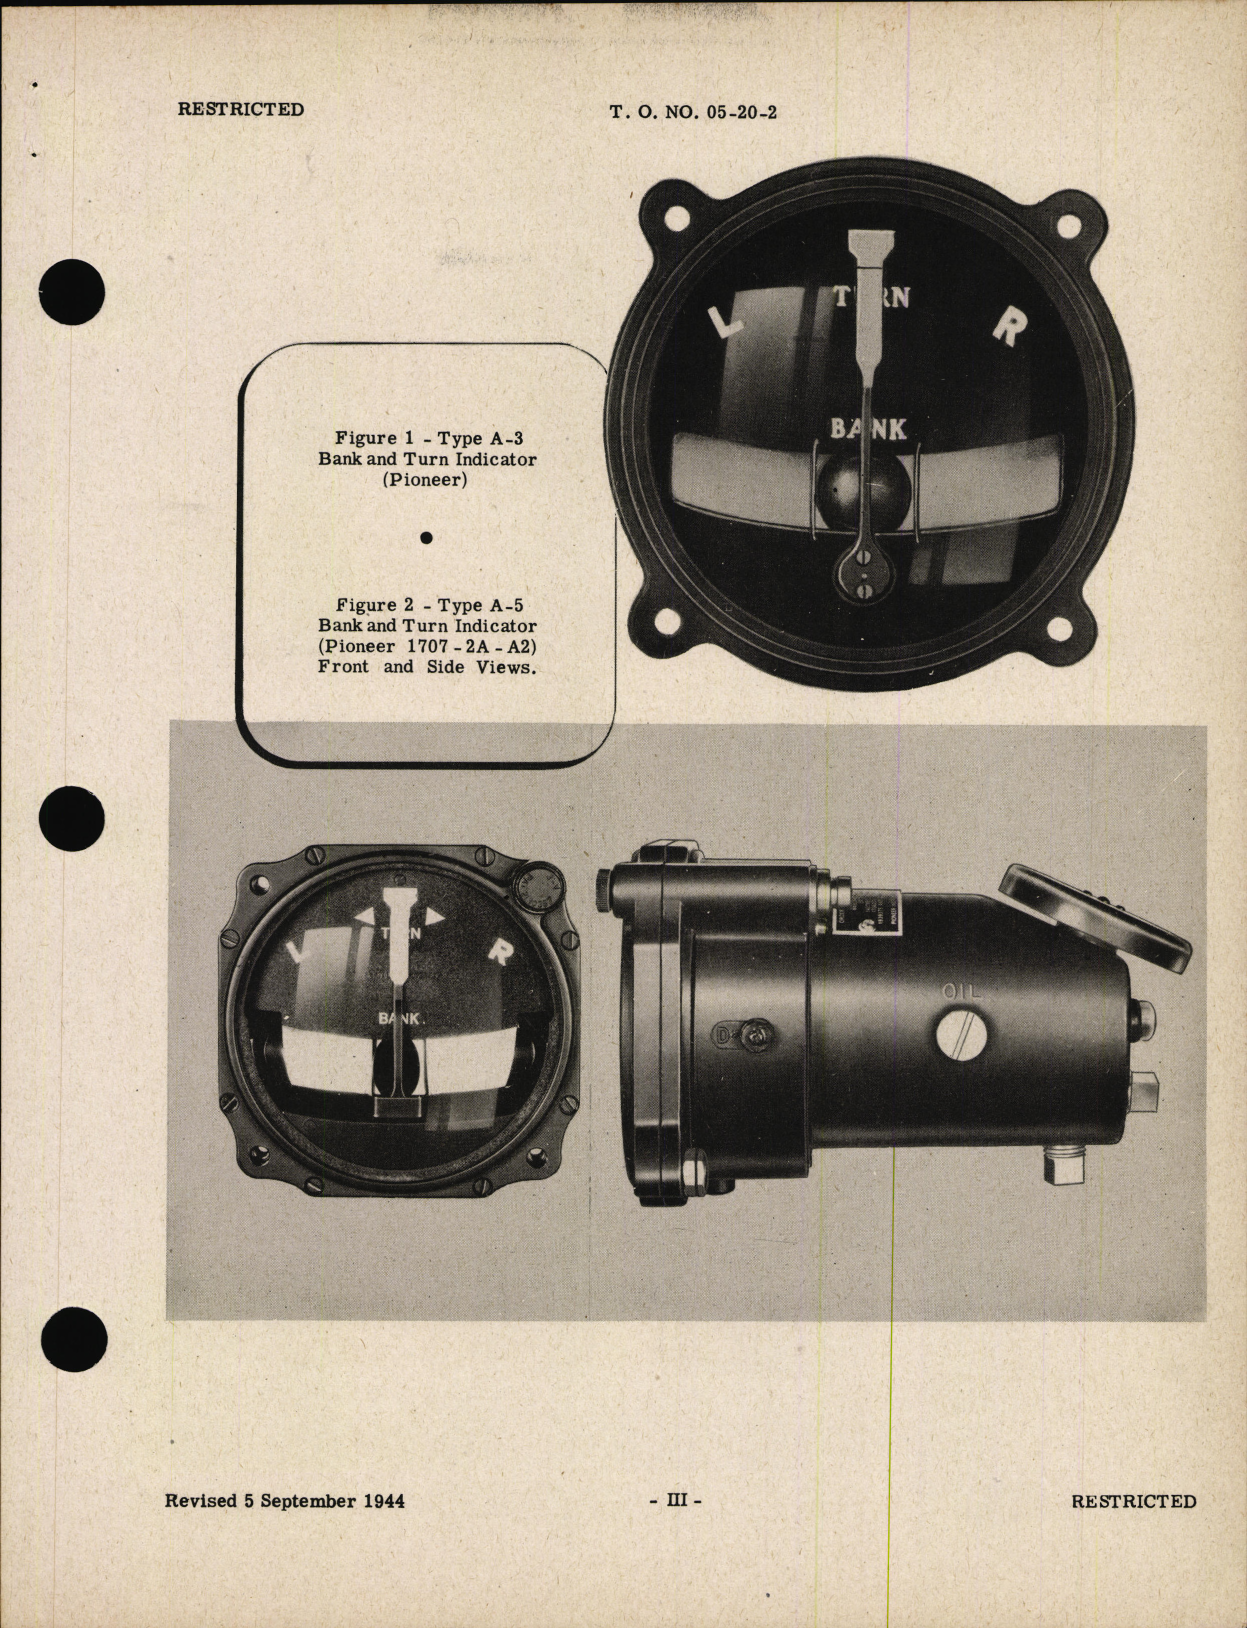 Sample page 5 from AirCorps Library document: Handbook of Instructions with Parts Catalog for Bank and Turn Indicators